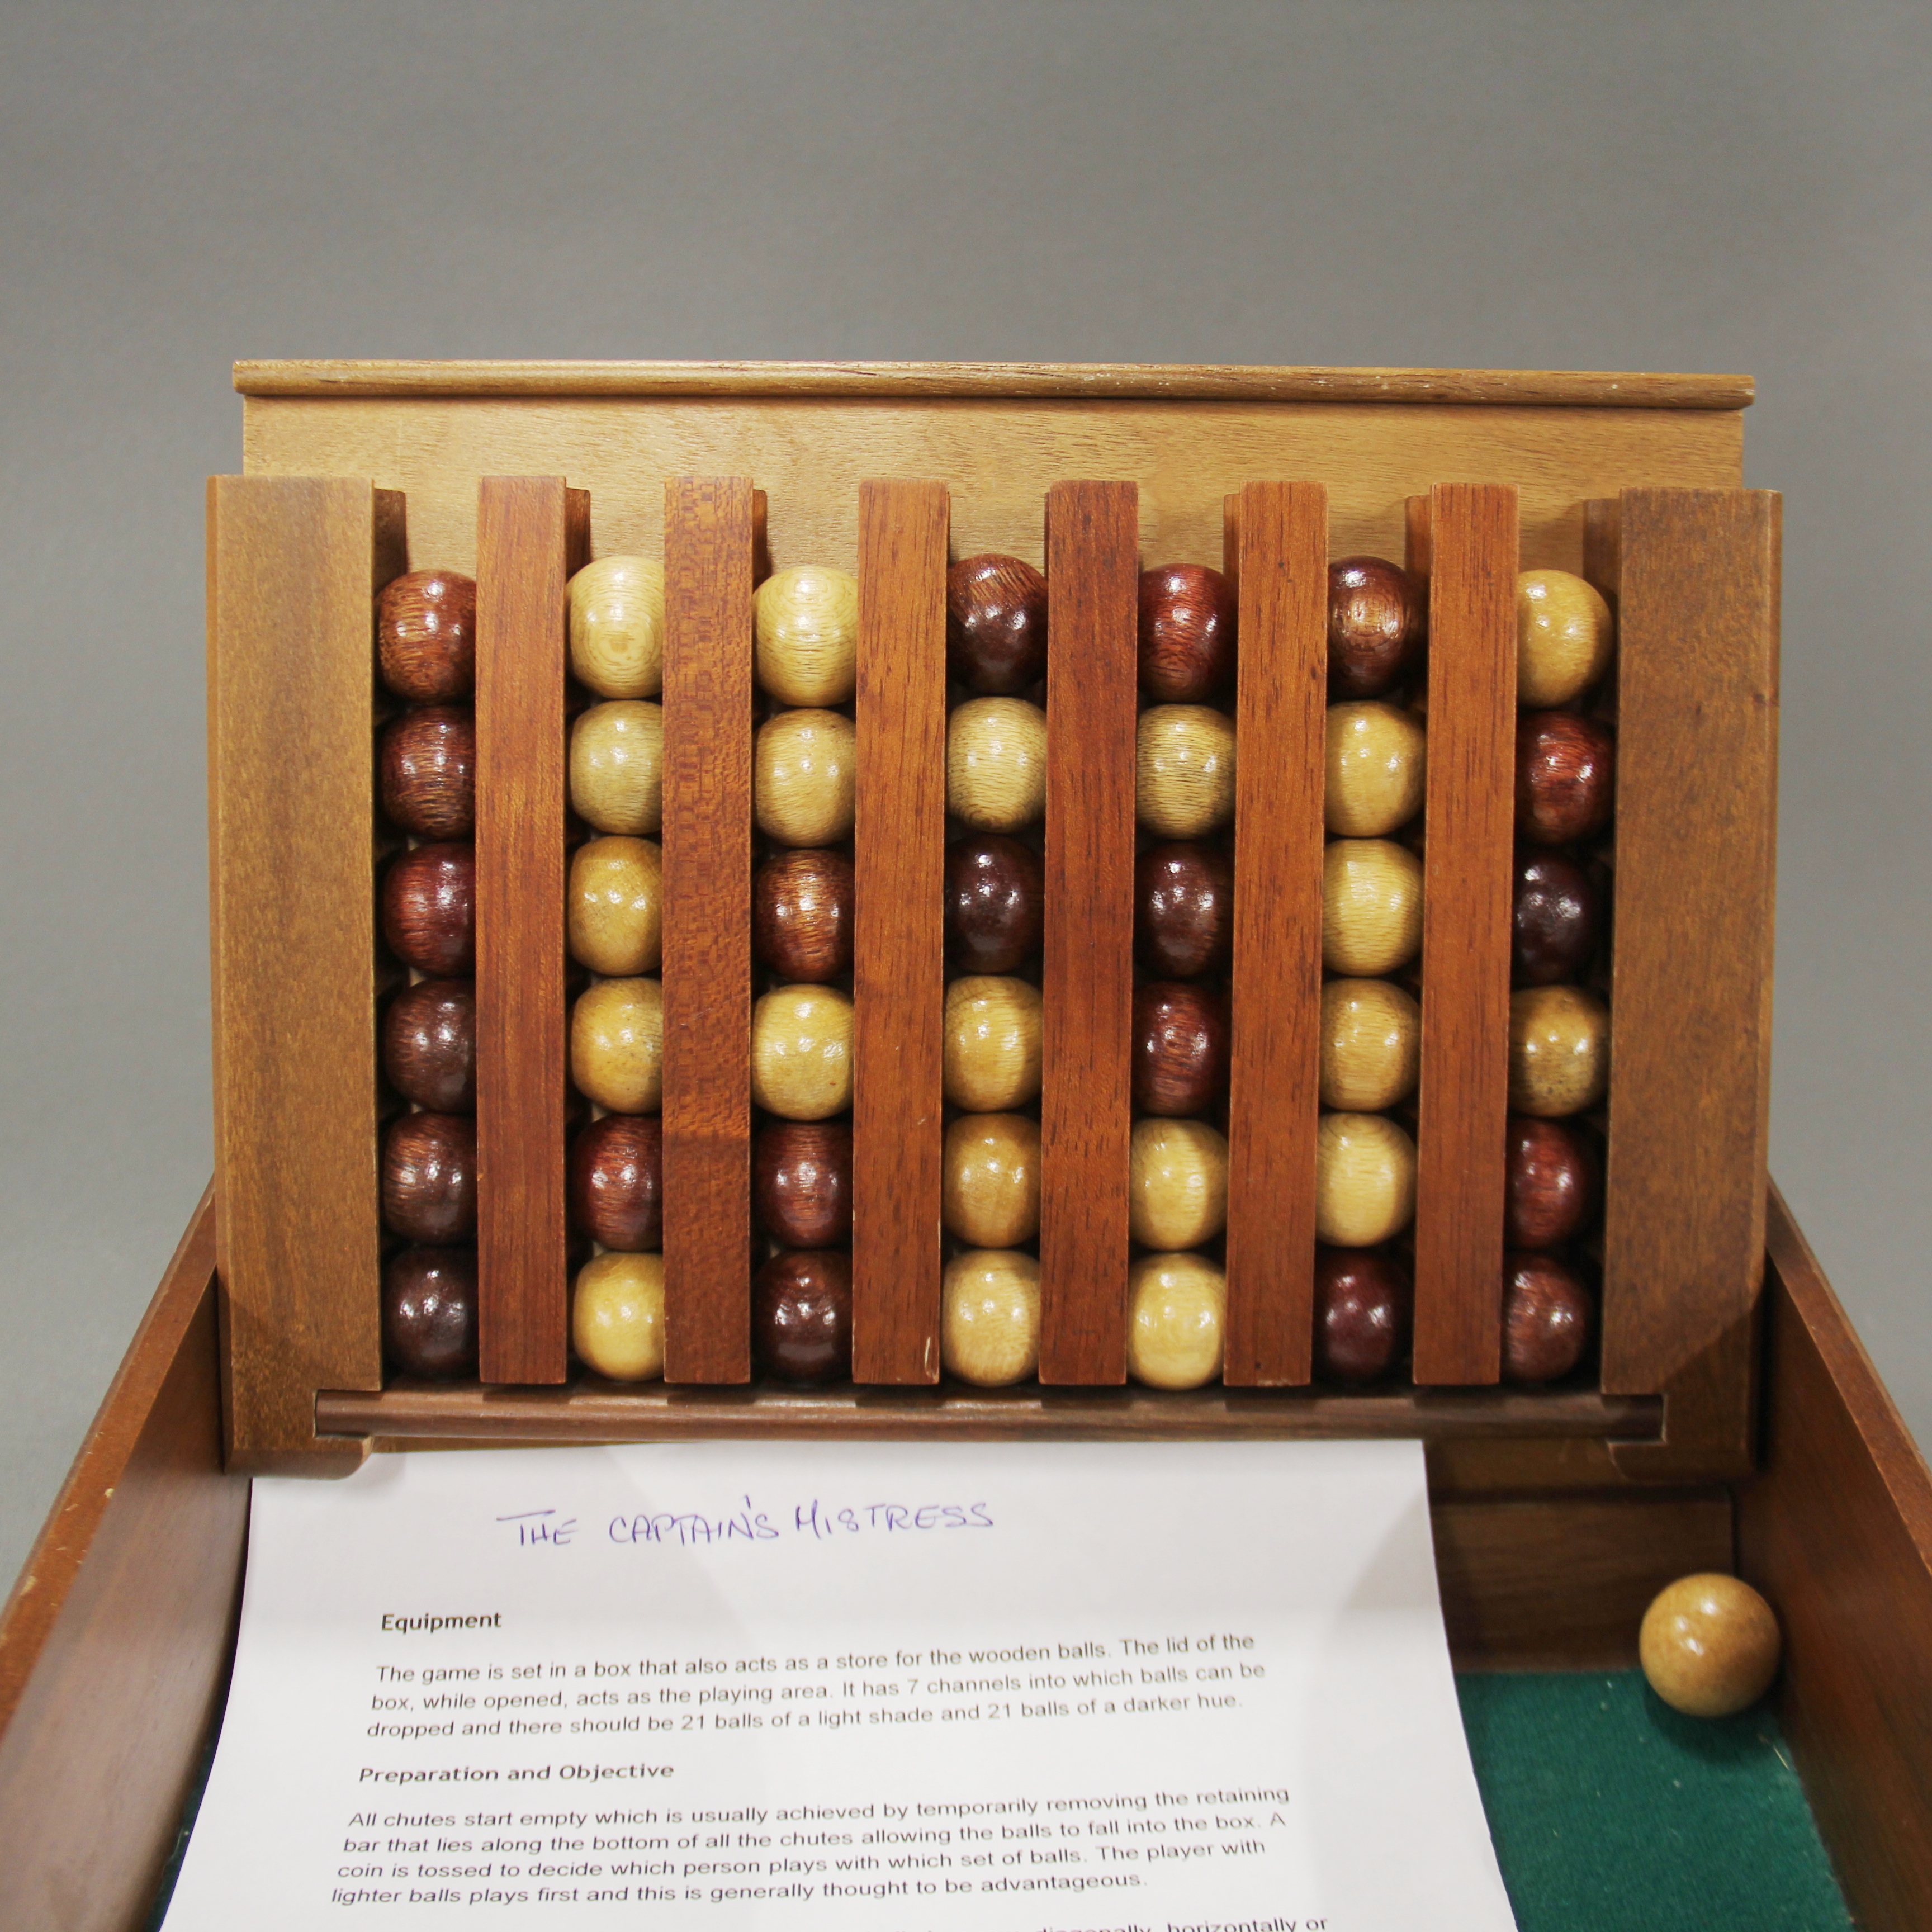 A wooden table game known as 'The Captain's Mistress', box size 29 x 23 x 8cm. - Image 2 of 3